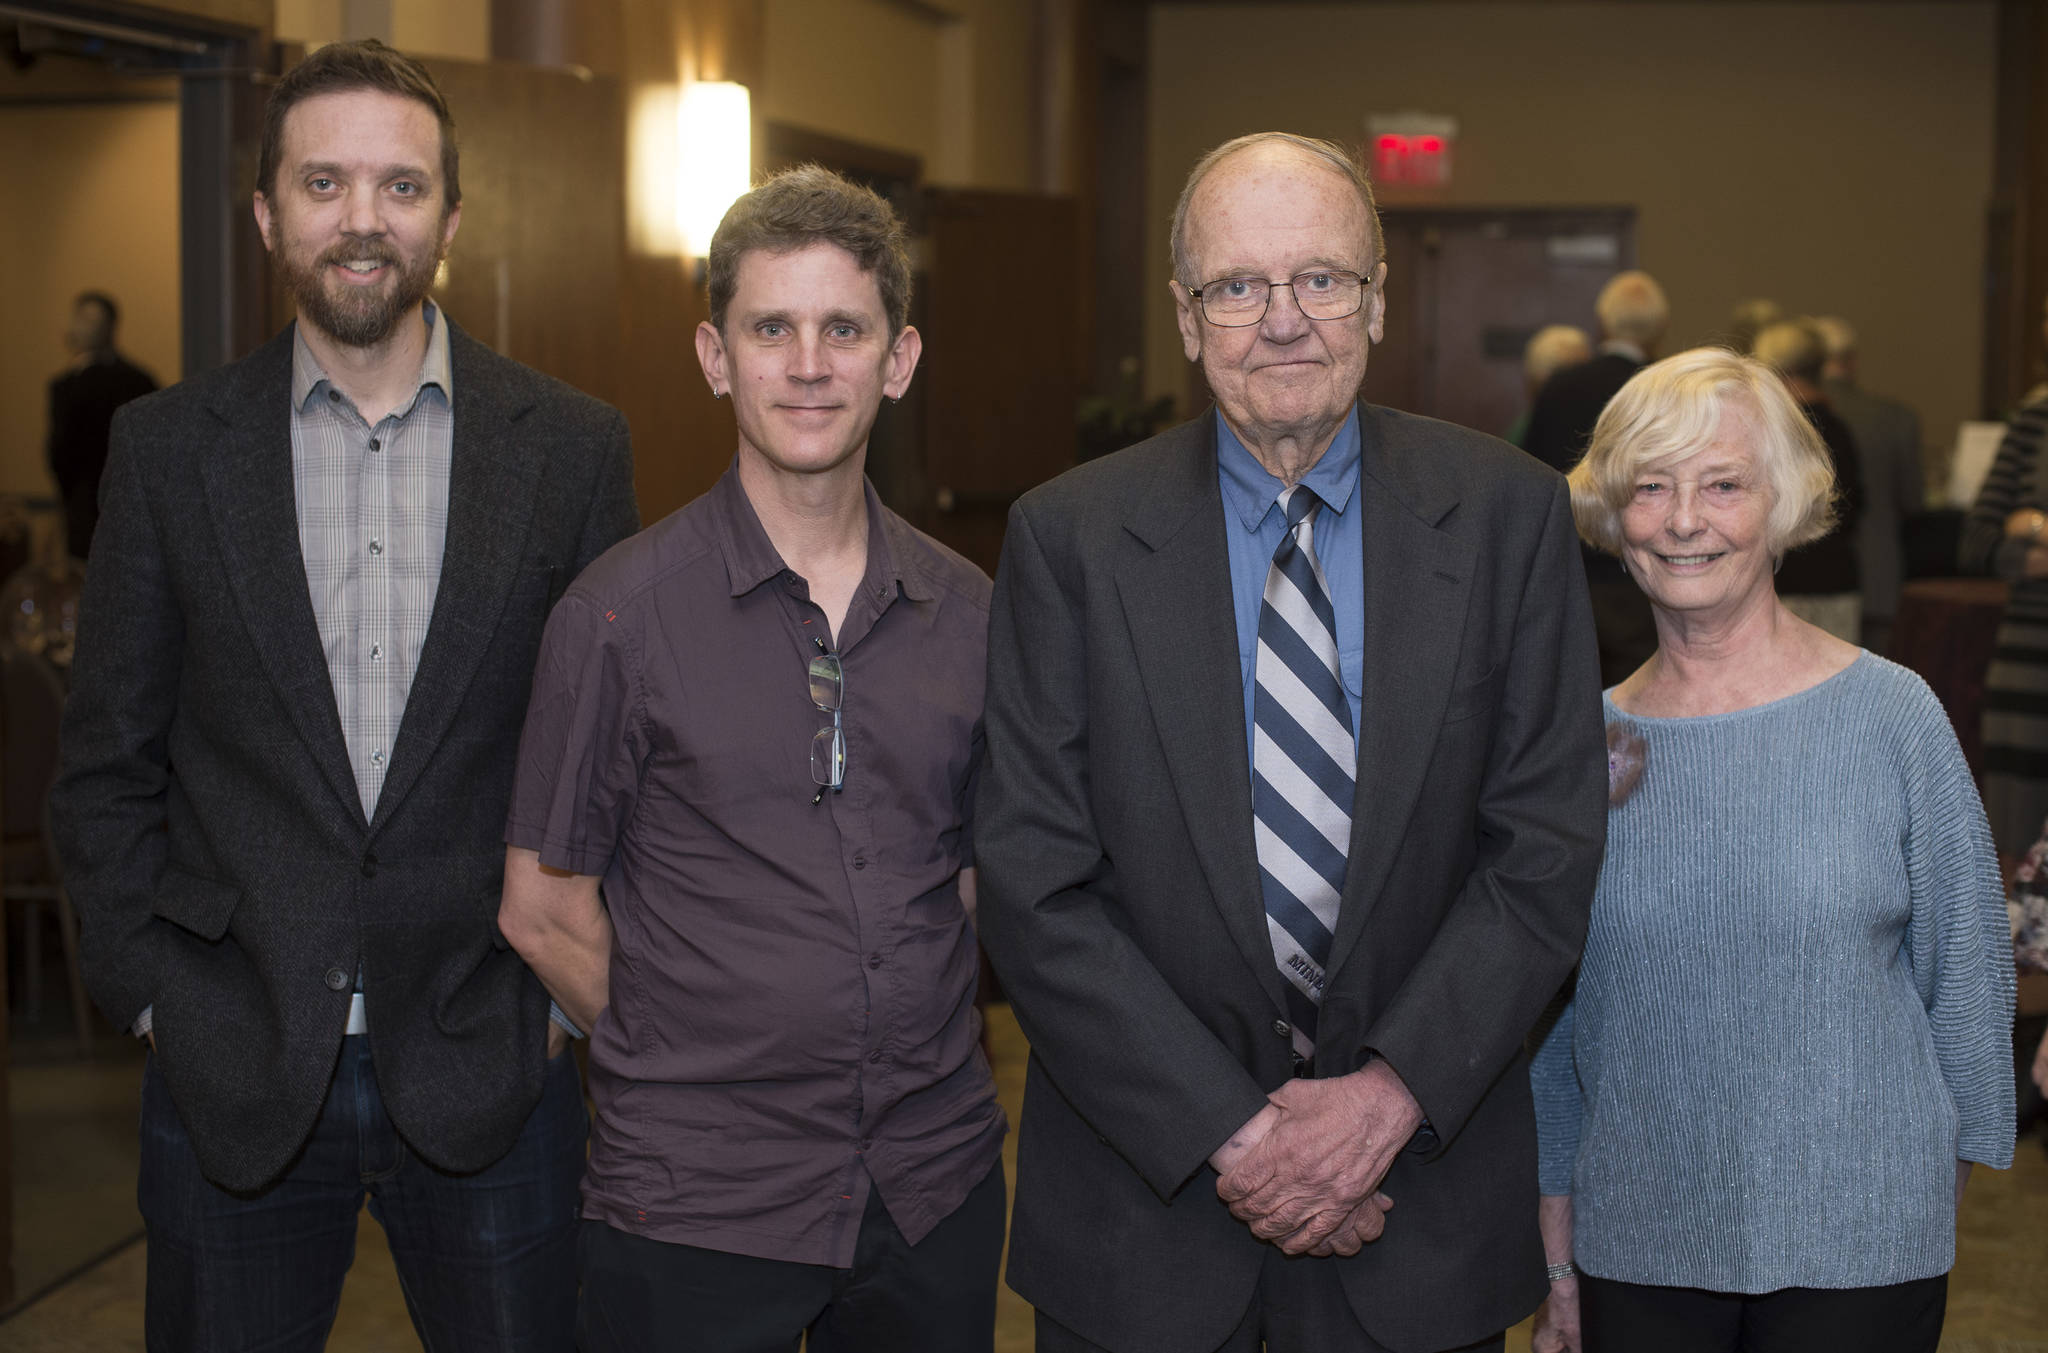 Mike Blackwell smiles with his sons, Andrew and Matthew, and friend, Carolyn Naftel. Blackwell recently received the Juneau Community Foundation’s Philanthropist of the Year award. (Courtesy Photo | Michael Penn for Juneau Community Foundation)